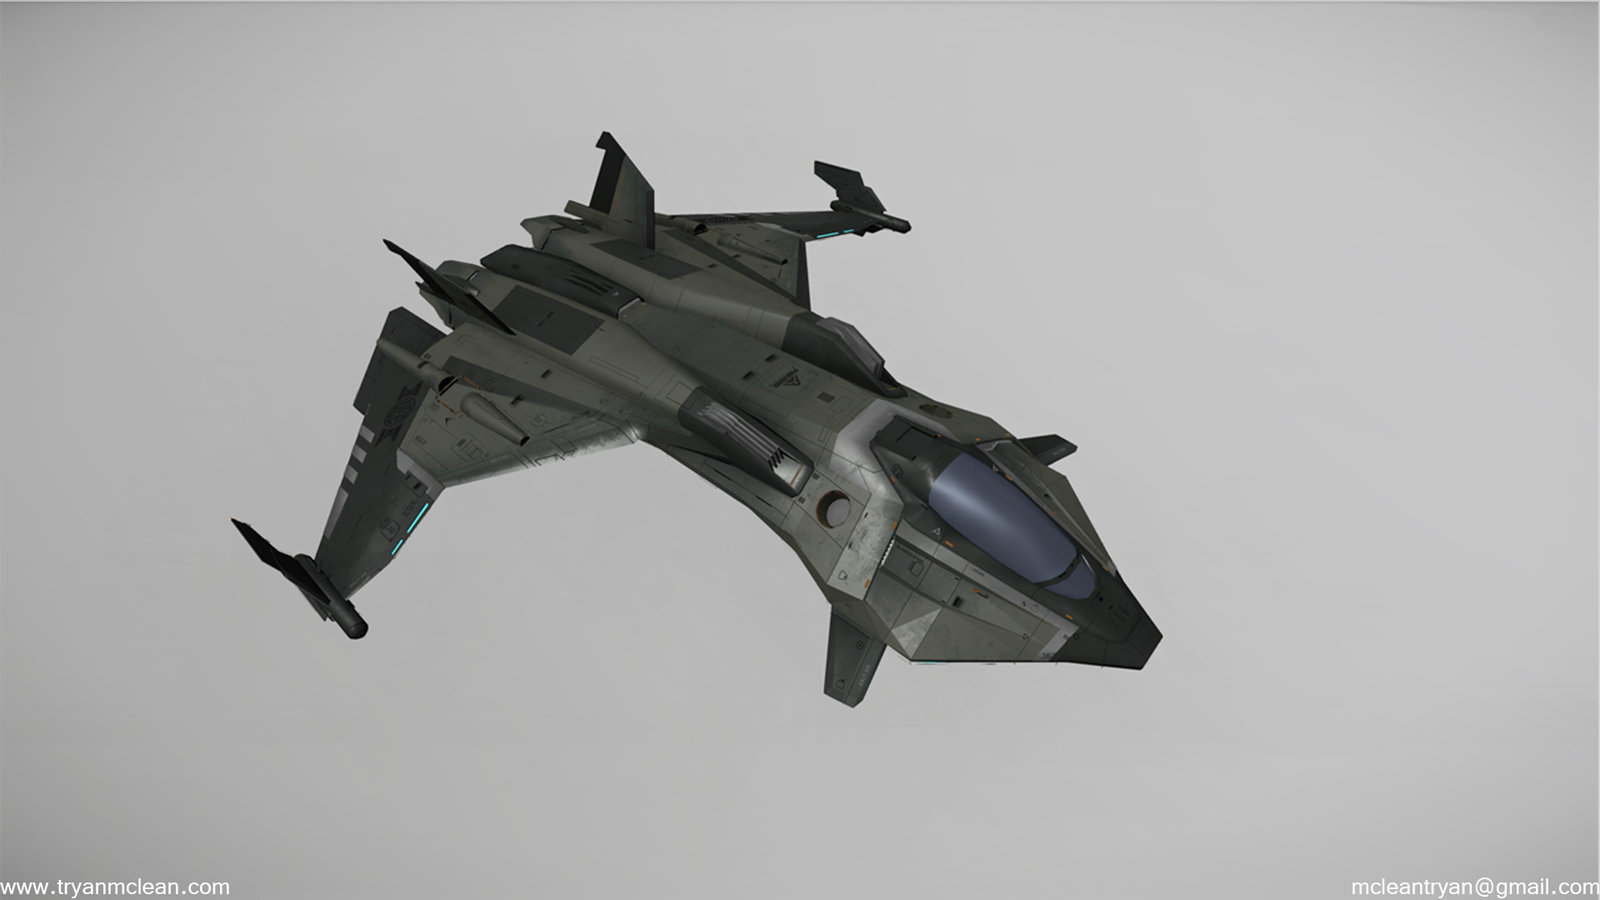 Star Citizen Subscriber Flair Model Ship. Modelling by my, down res from in game model. Textures by CIG Austin. 